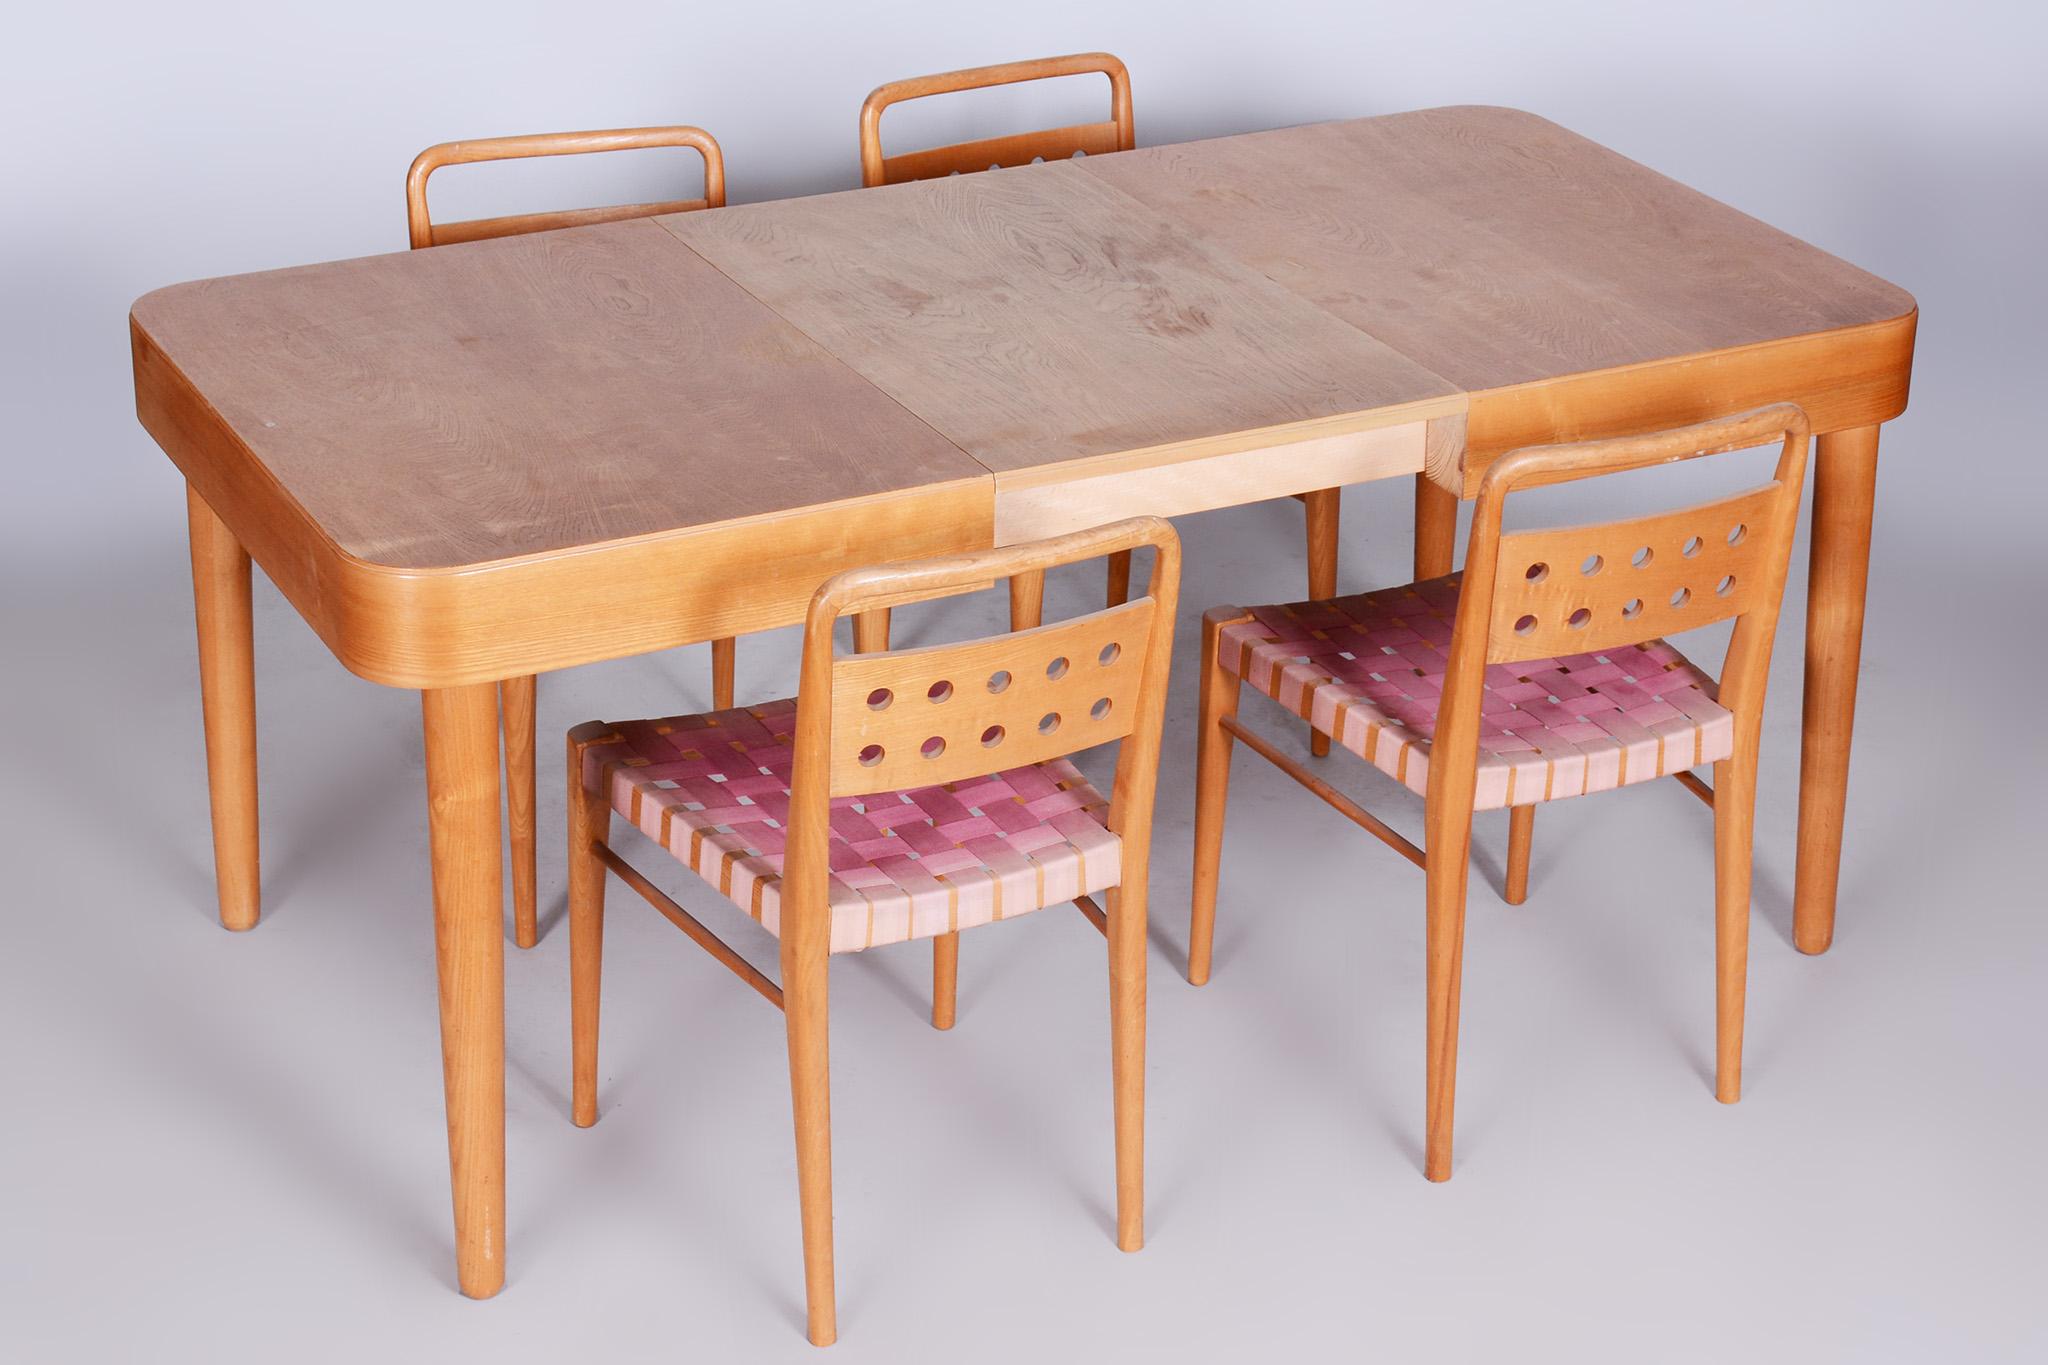 Midcentury Ash Dining Table, Made by Uluv, Revived Polish, Czechia, 1950s In Good Condition For Sale In Horomerice, CZ